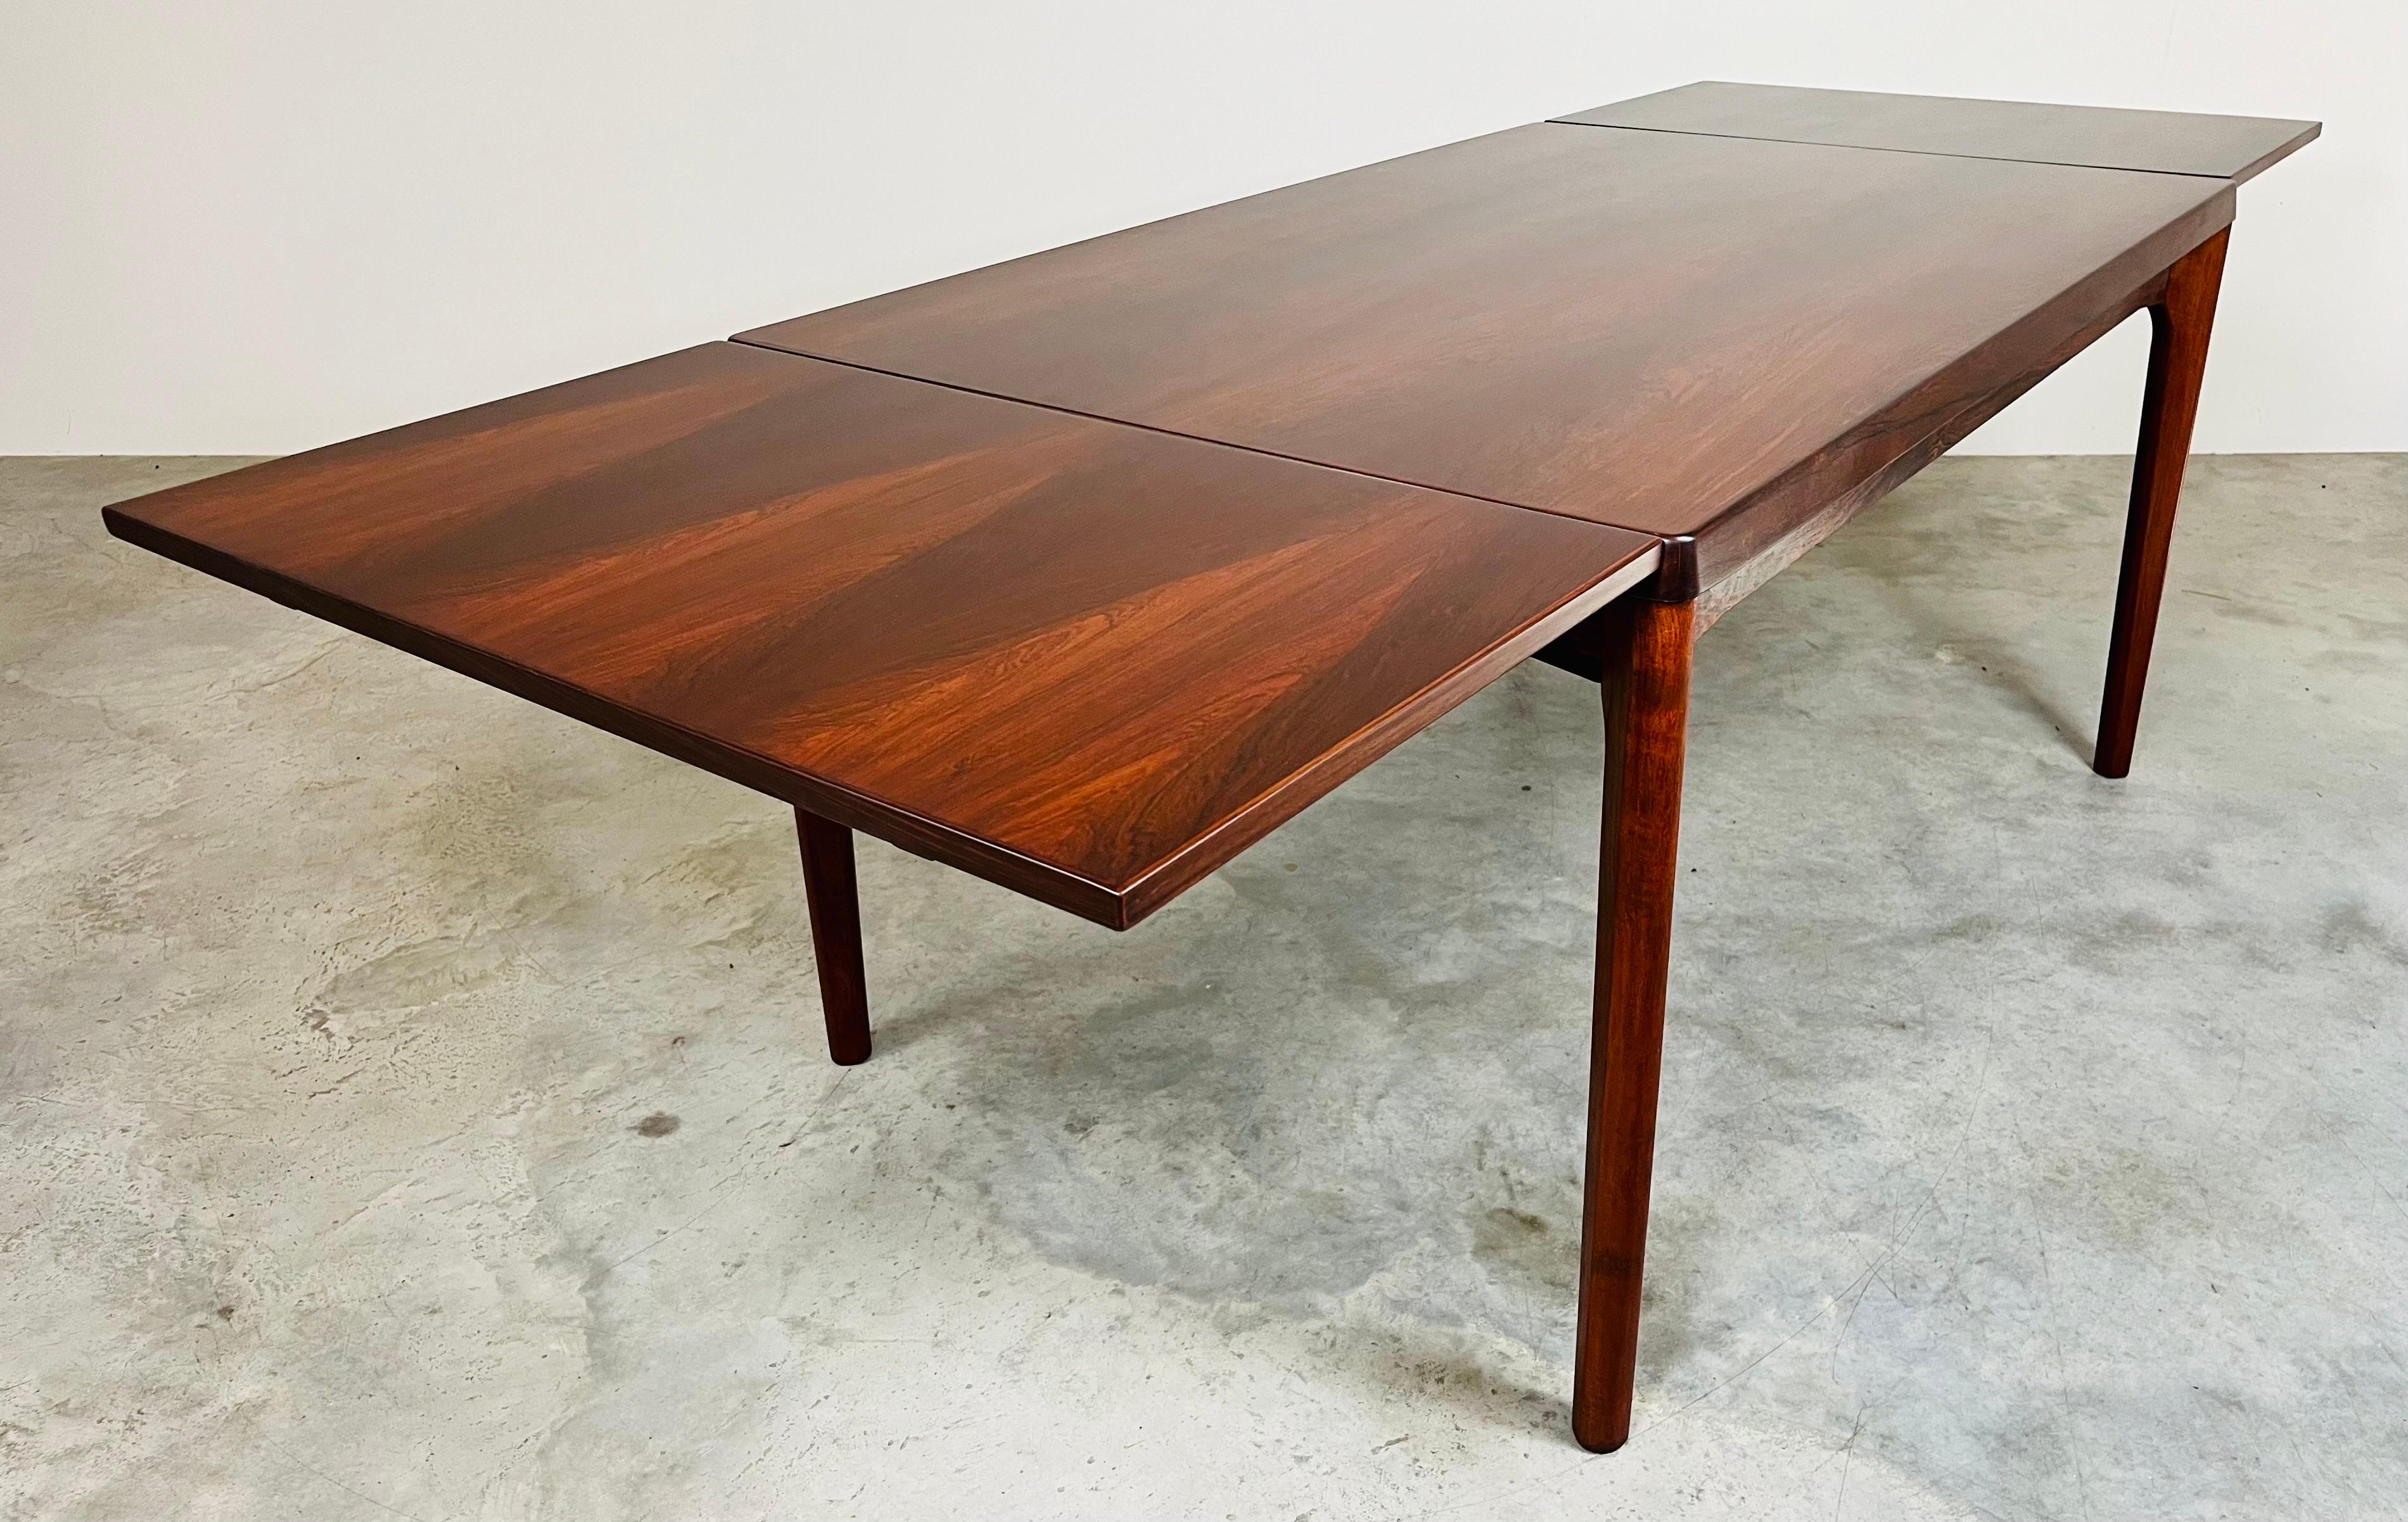 A beautiful rosewood dining table having self storing leaves by VEILE STOLE- og MOBELFABRIK. -Denmark circa 1970
In excellent condition having been masterfully refinished by one of the greatest woodworkers on the east coast Wayne Batten. Please